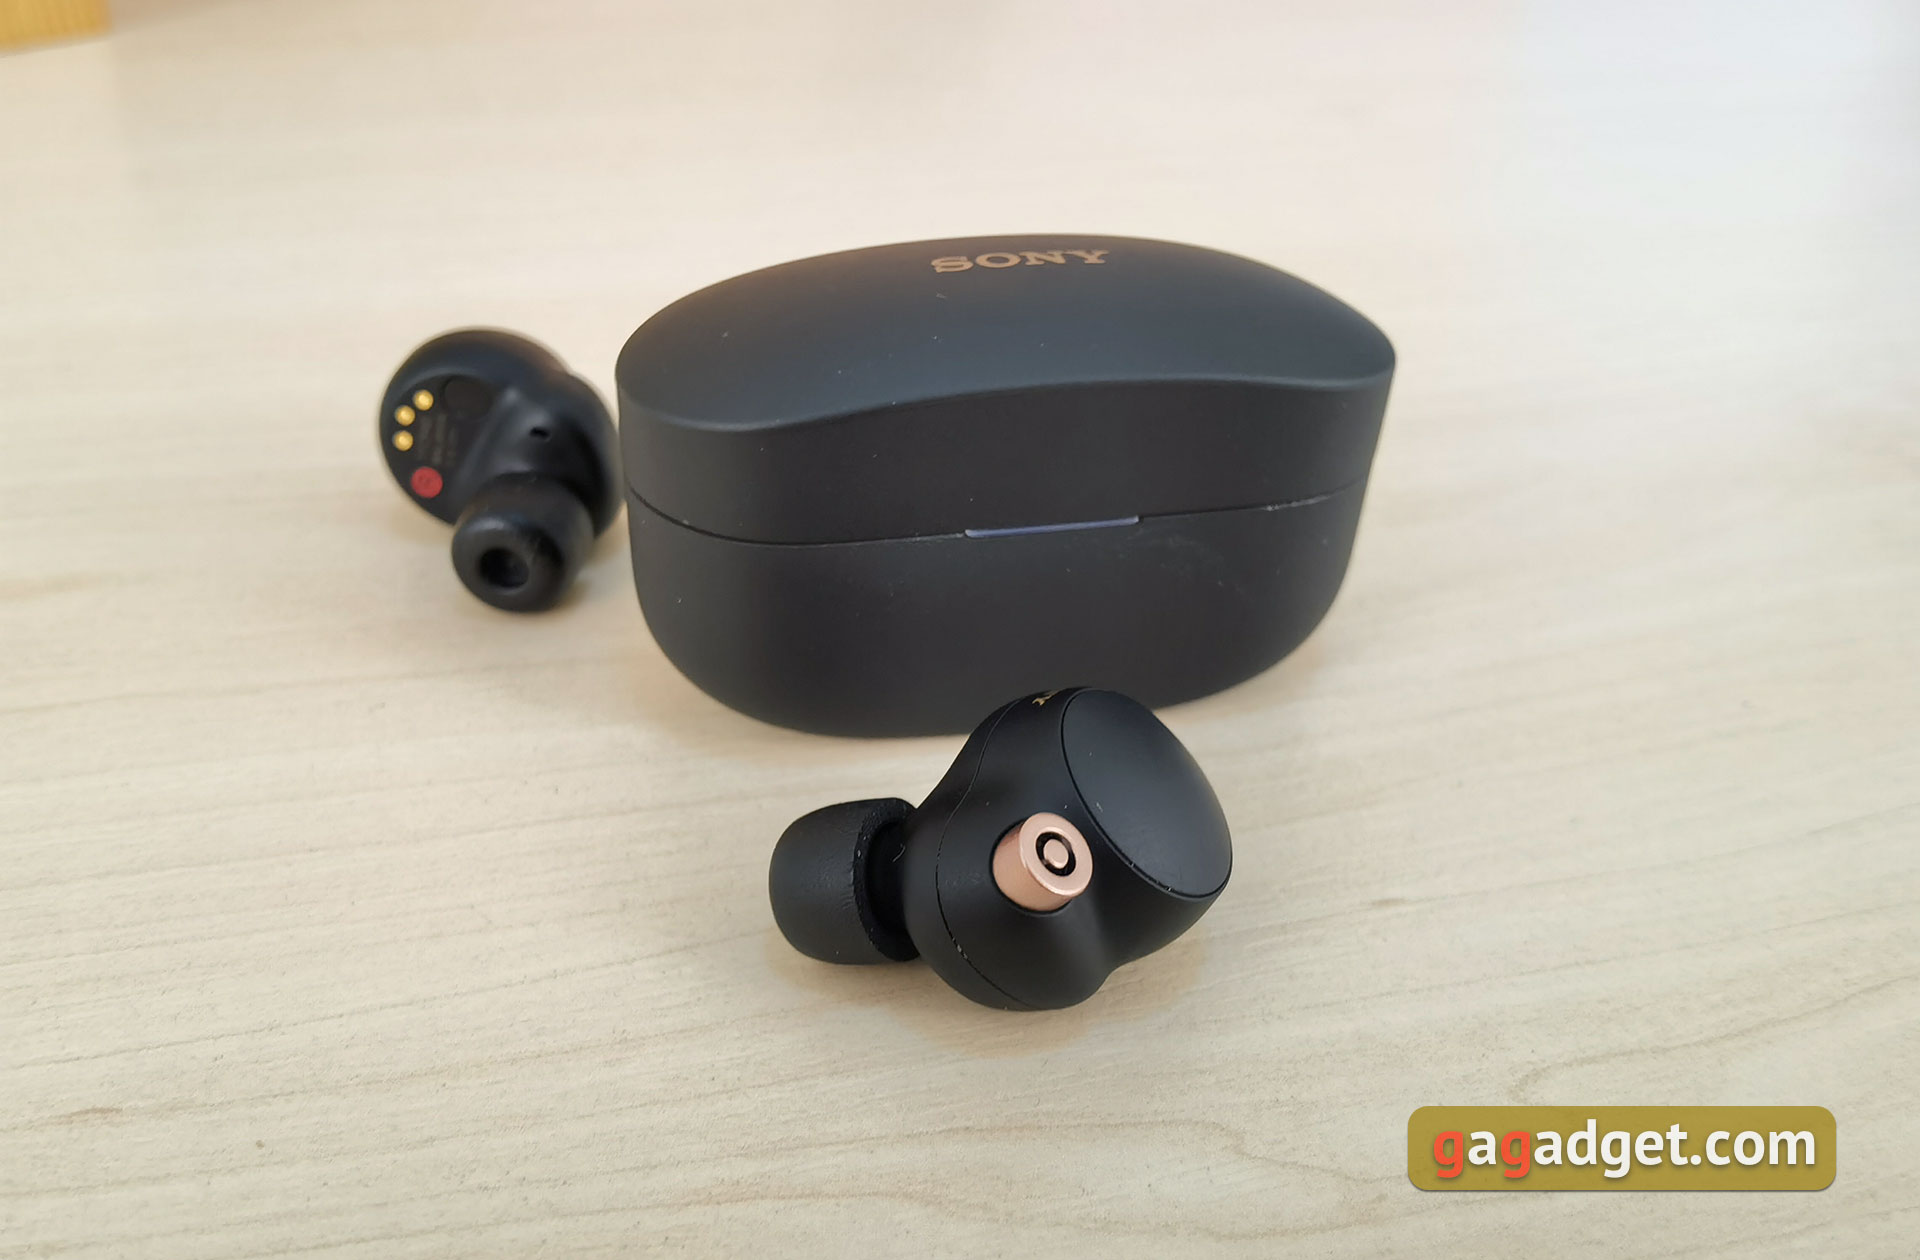 Review: Why the Sony WF-1000XM4s Are the Best Noise-Canceling Earbuds Yet